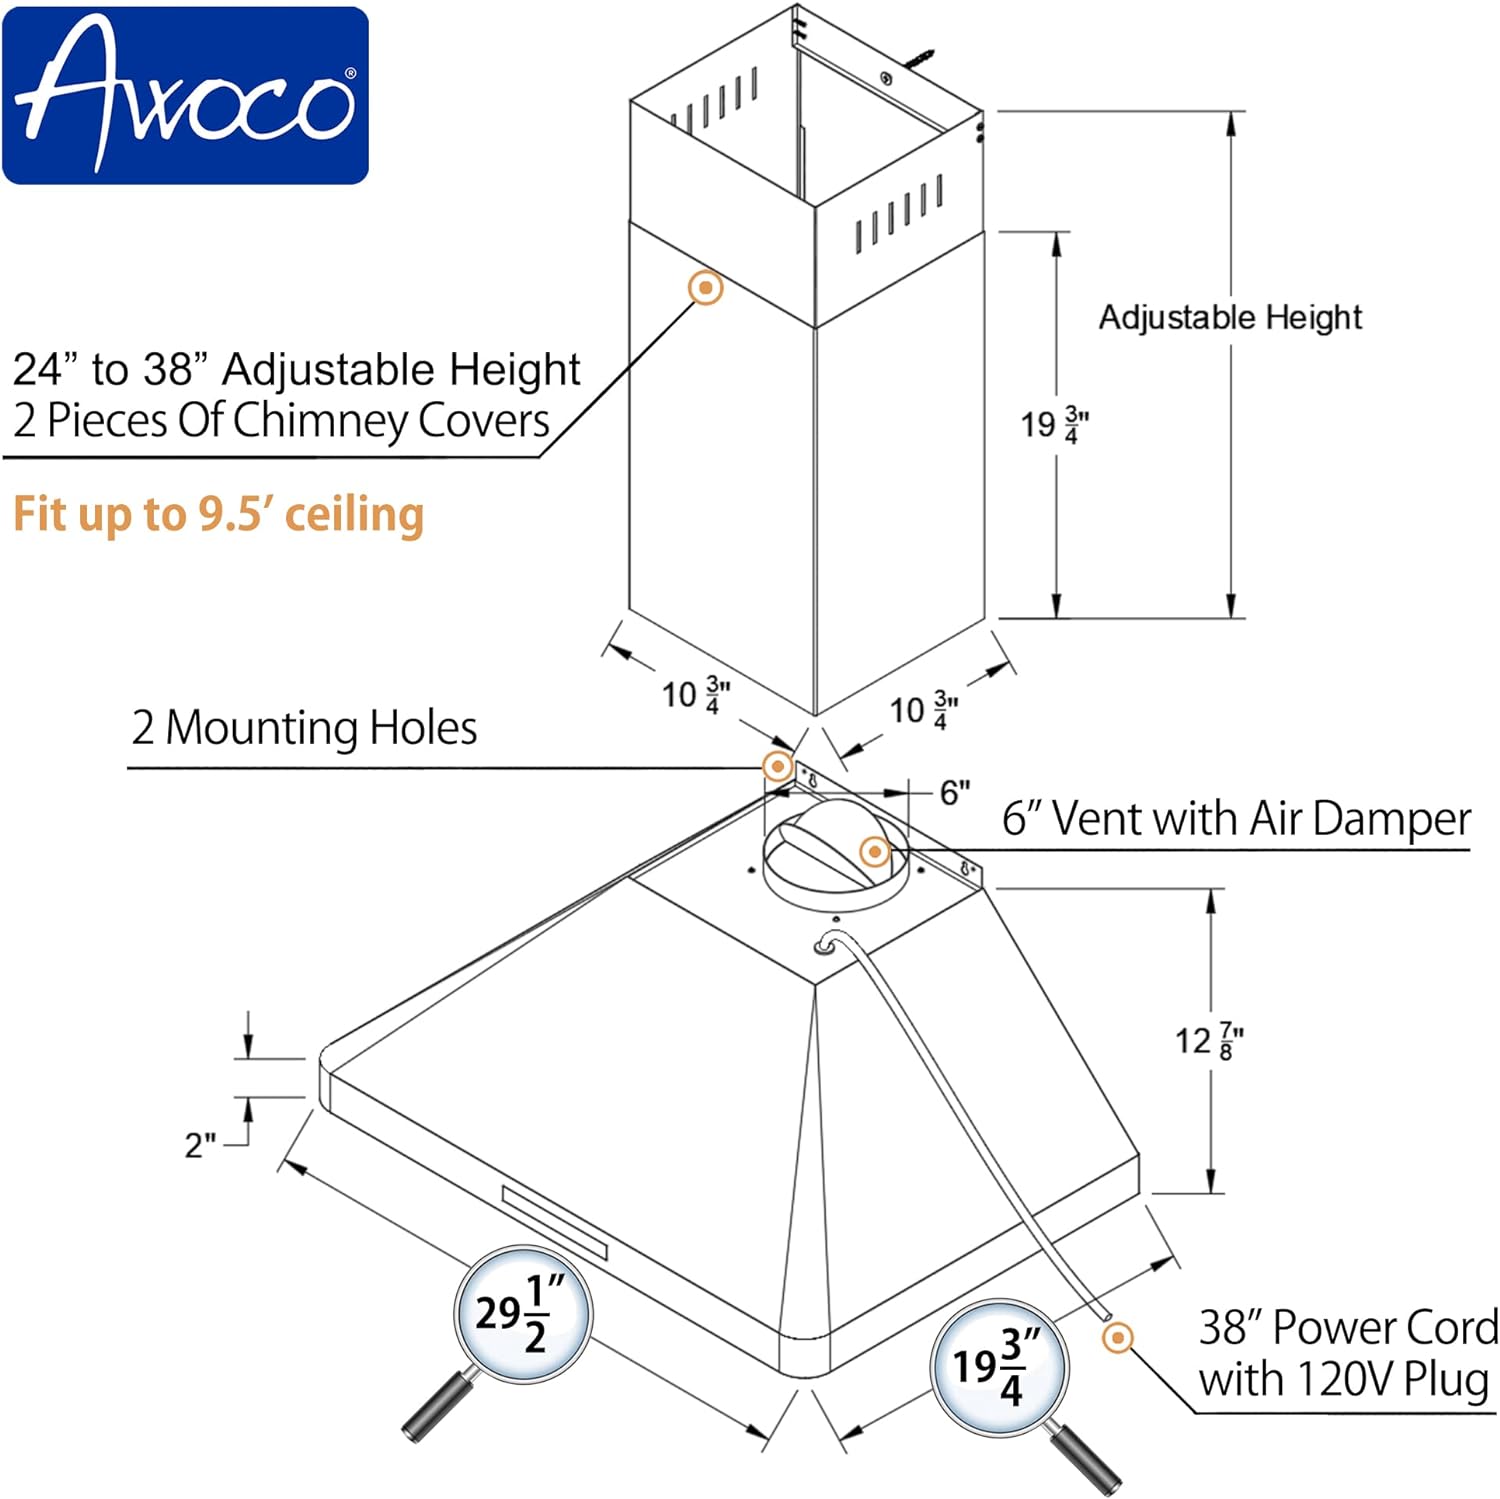 [Refurbished] Awoco RH-WT-C30 30” Wall Mount Stainless Steel Range Hood 3 Speeds, 6” Round Top Vent 800CFM 2 LED Lights & Remote Control